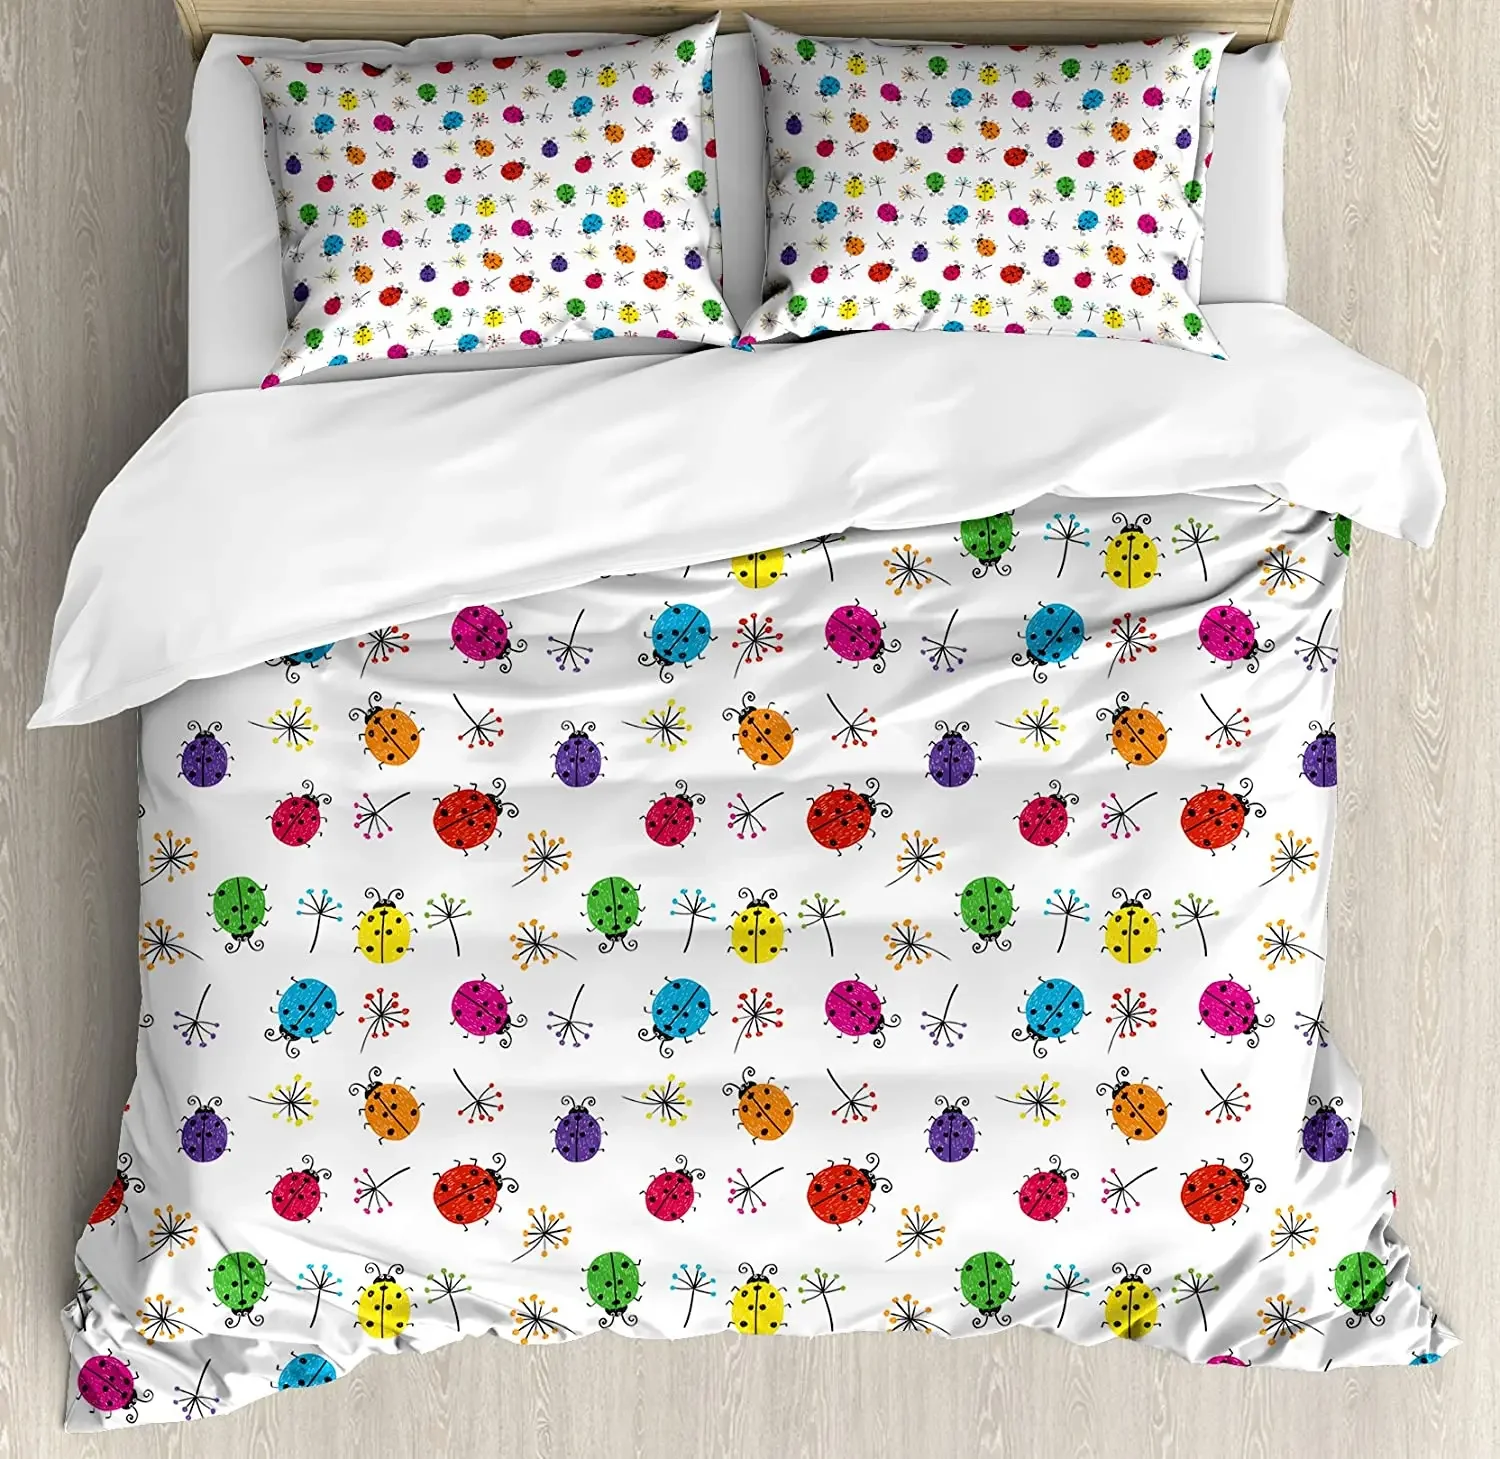 

Ladybugs Bedding Set Comforter Duvet Cover Pillow Shams Dotted Insects with Floral Illustration Val Bedding Cover Double Bed Set